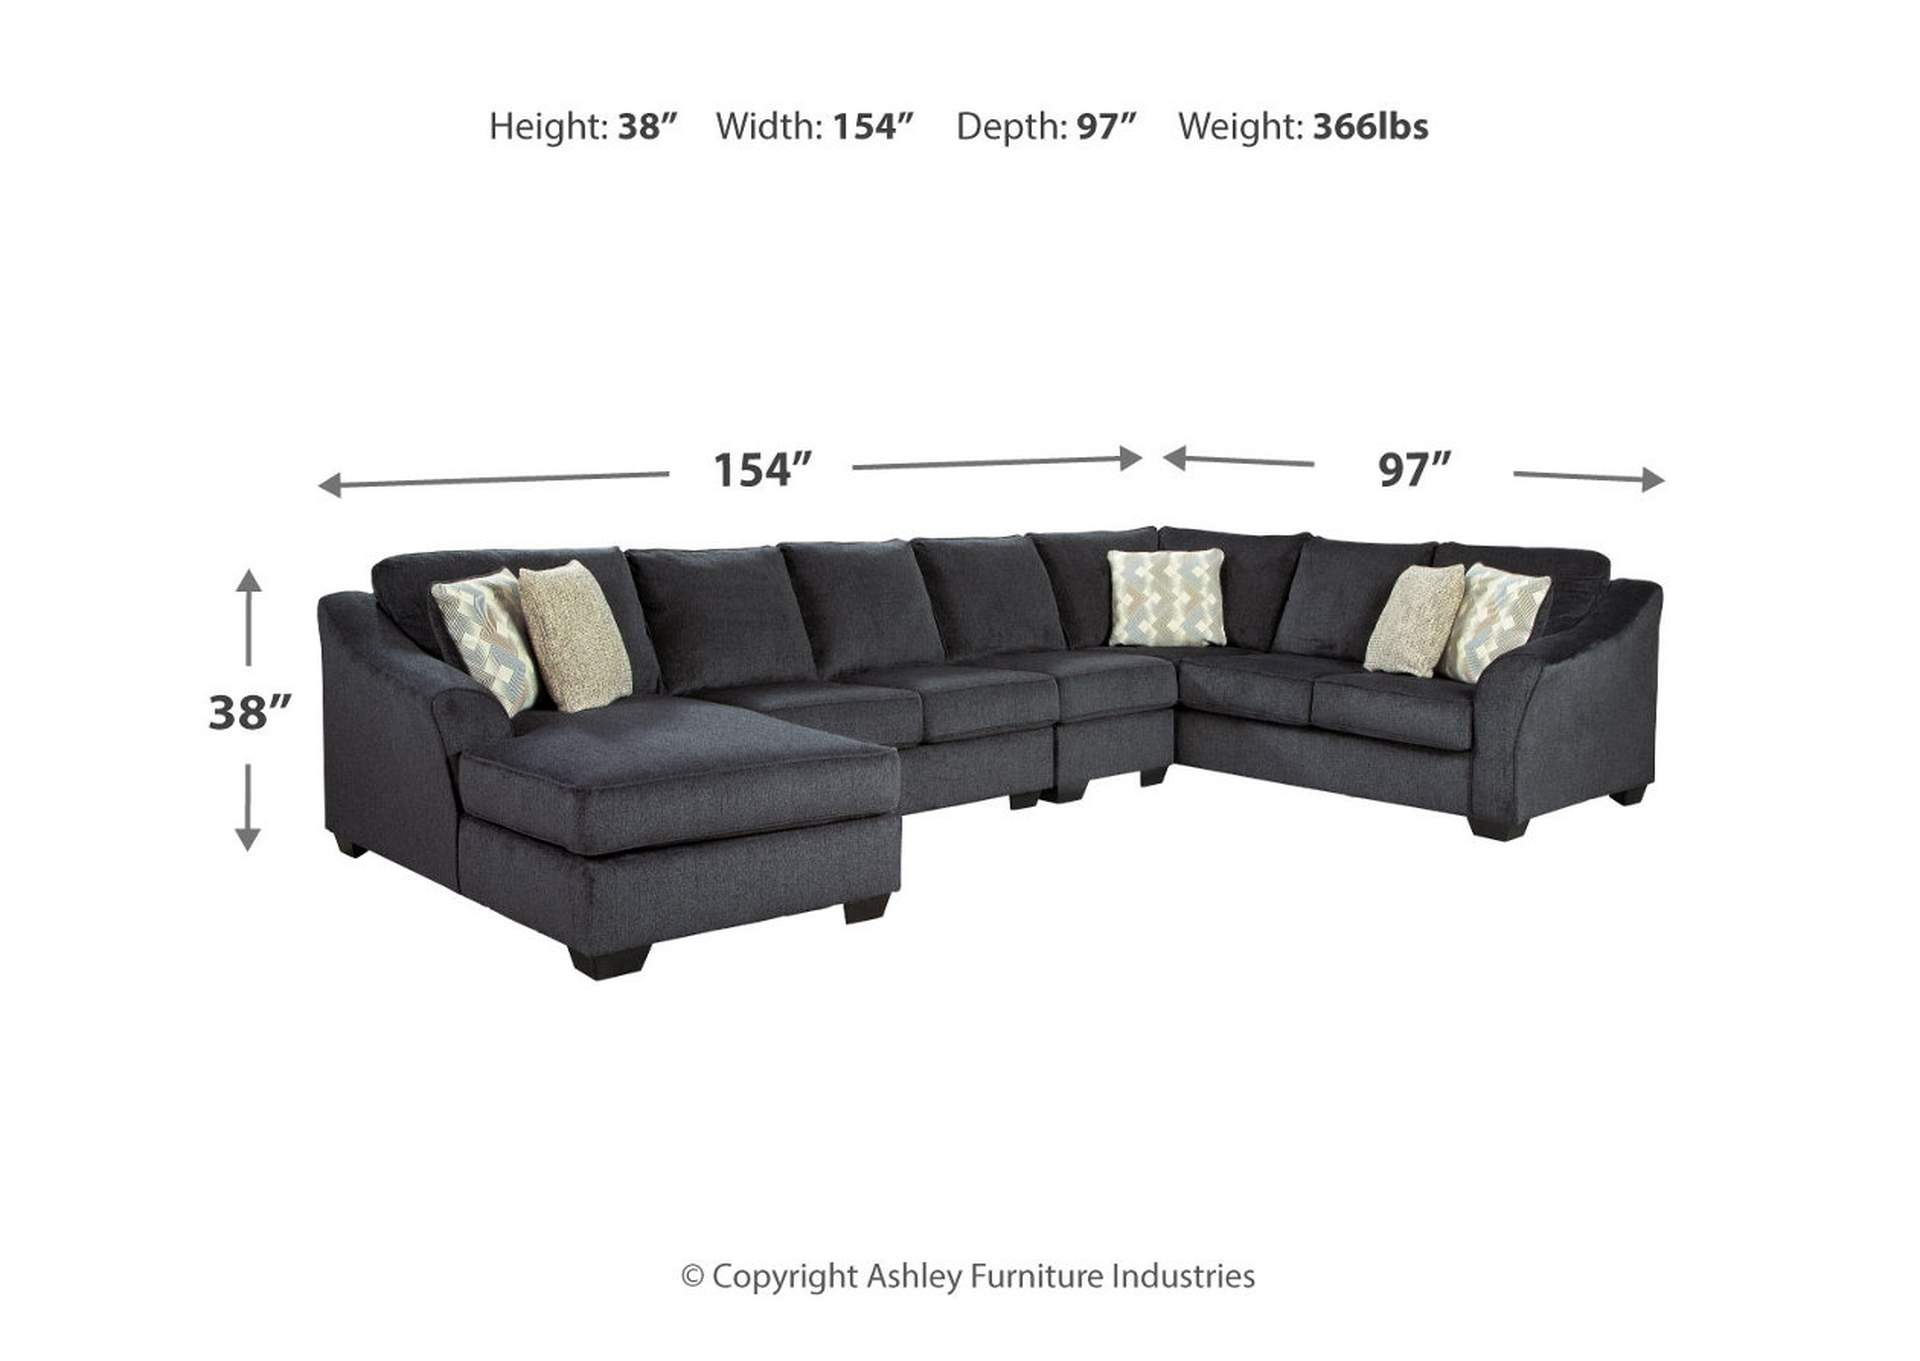 Eltmann 4-Piece Sectional with Chaise,Signature Design By Ashley